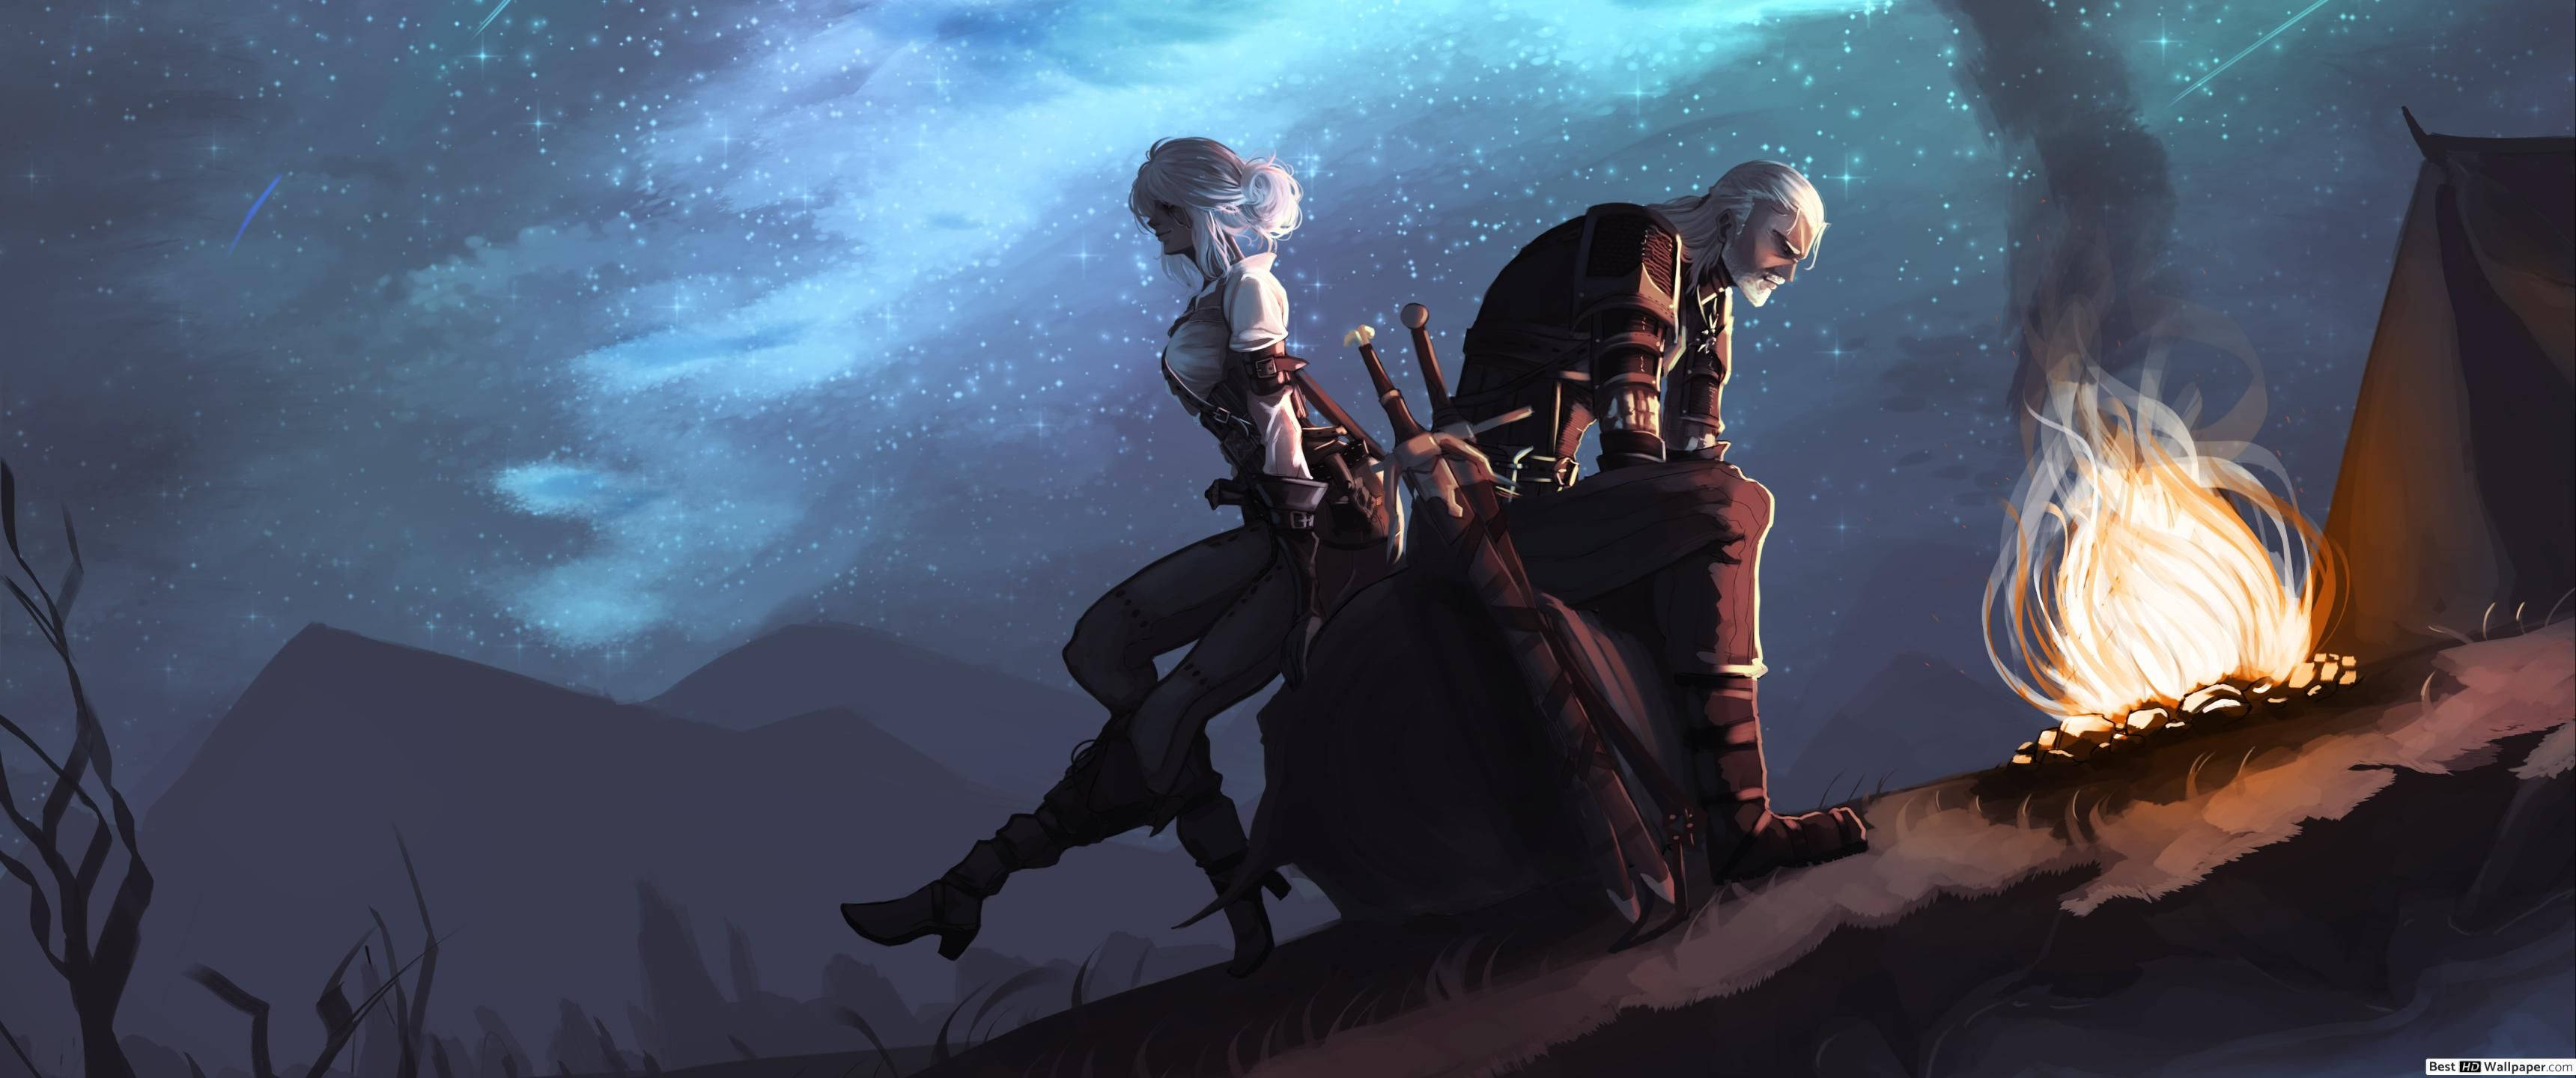 The Witcher Fan Art Wallpapers